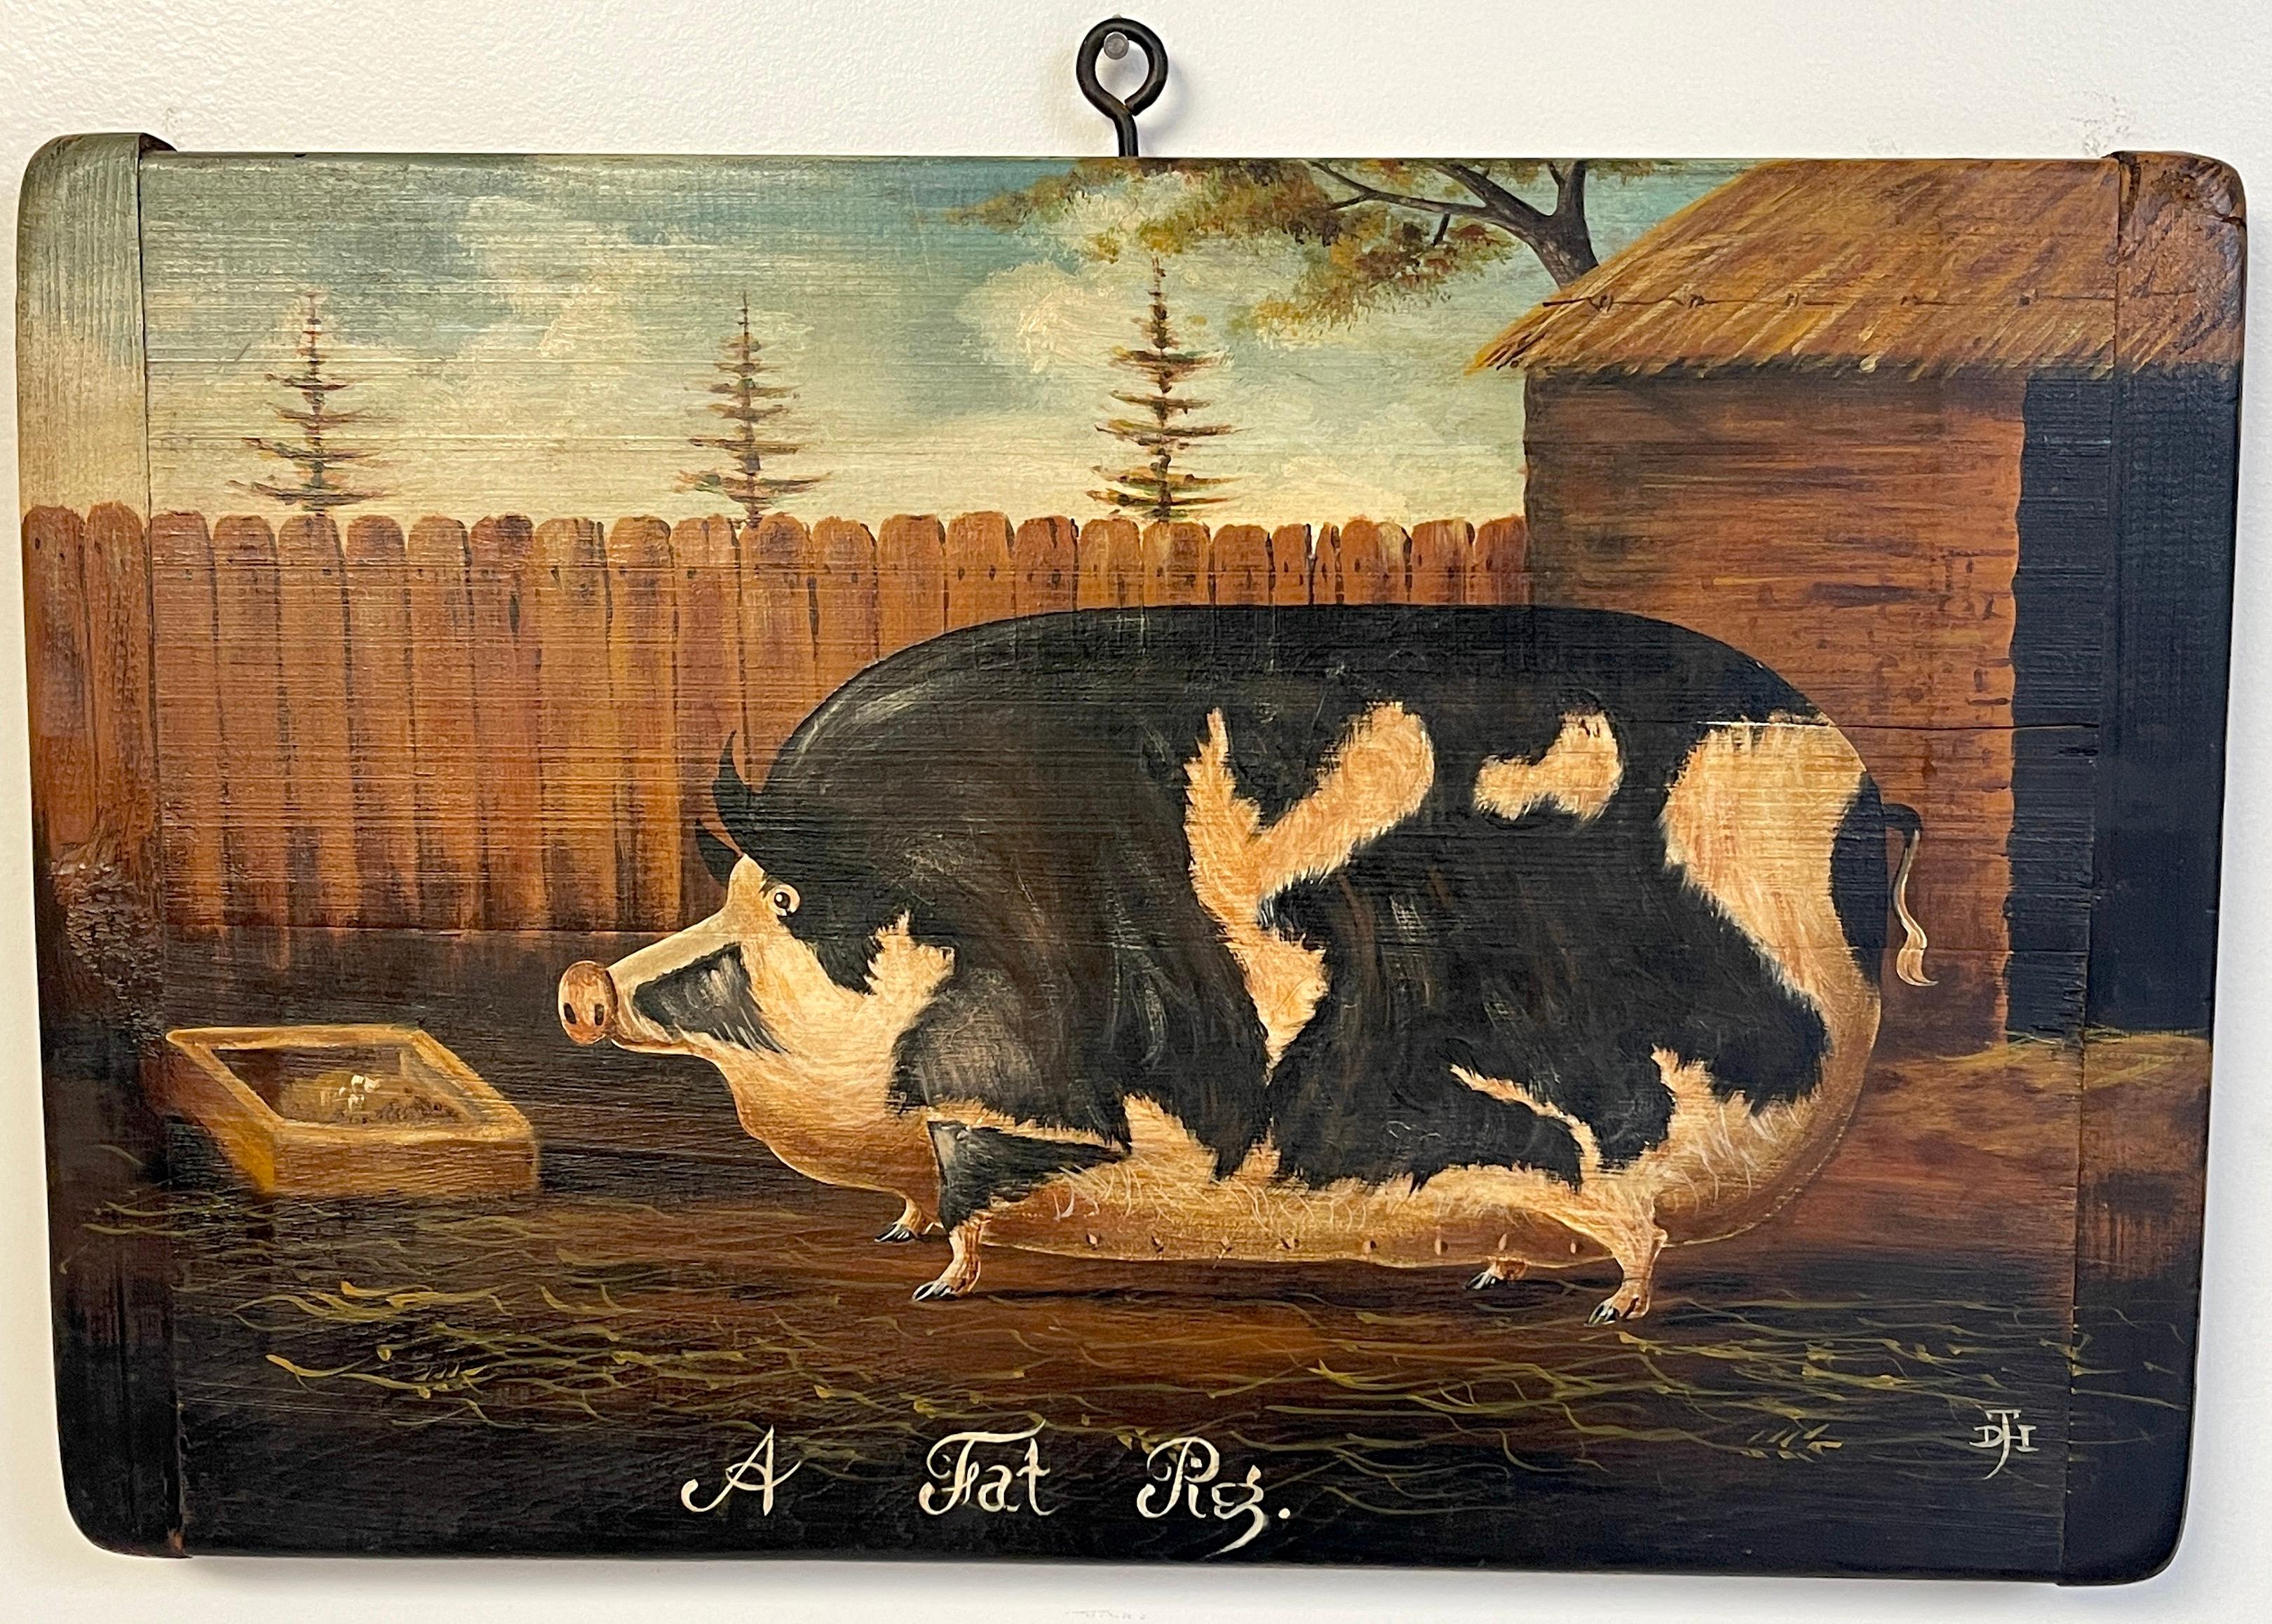 20th Century English School Style Painting of a Prize Pig, 'A Fat Pig'